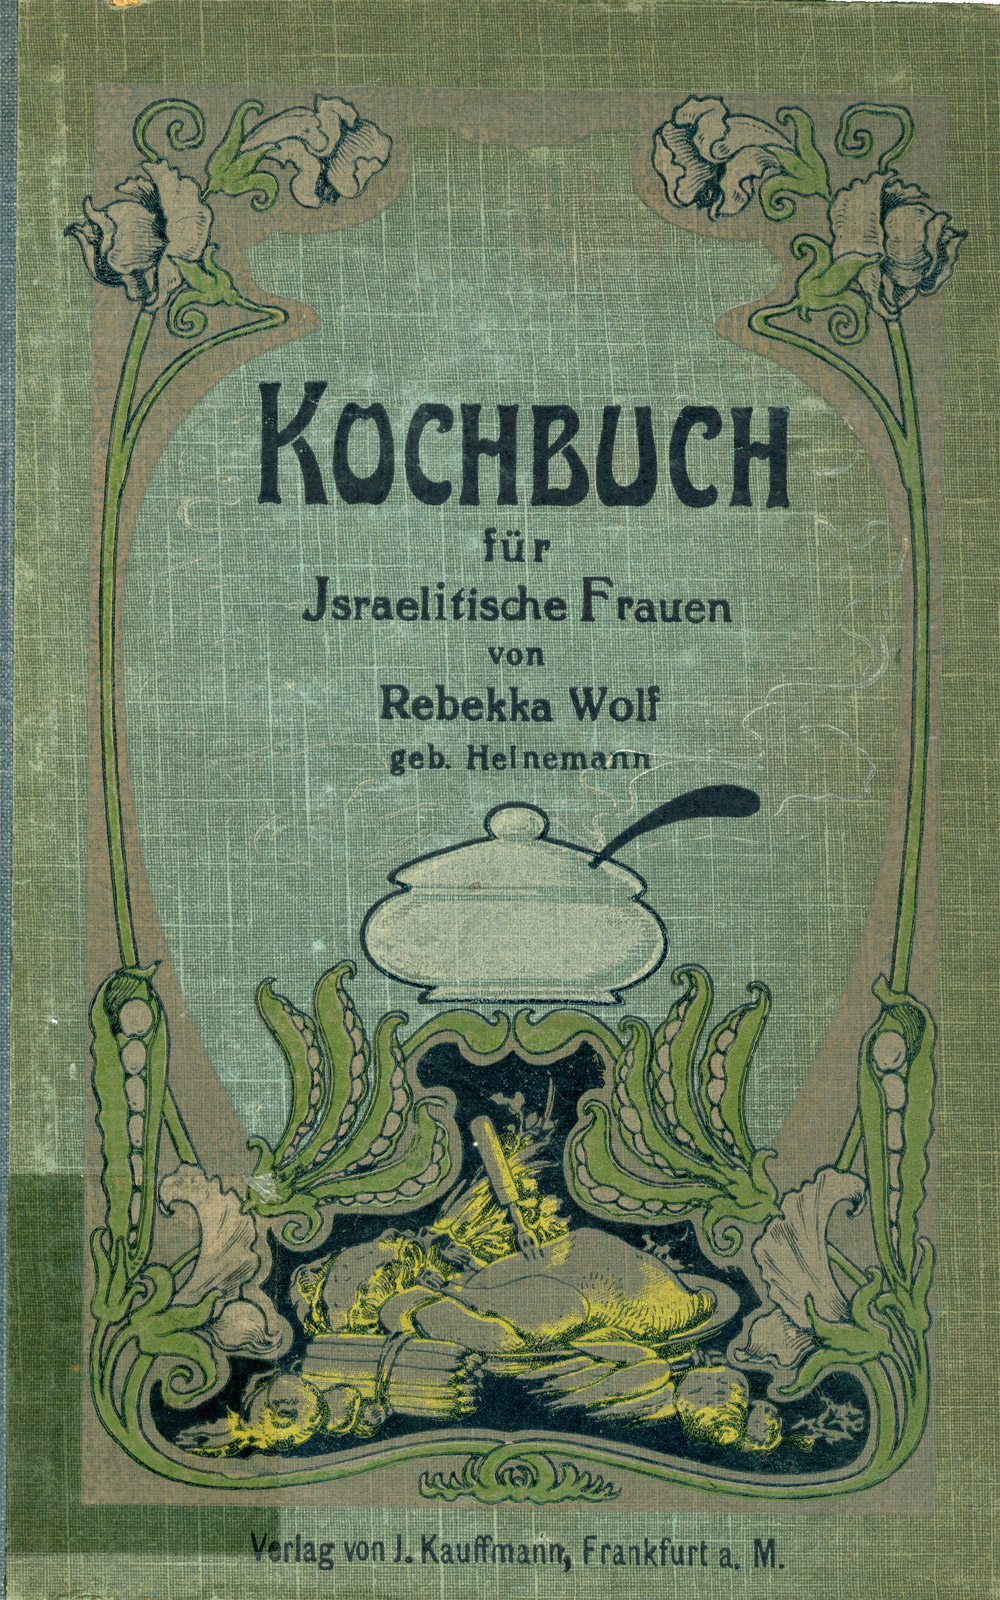 Cover image of the cookbook